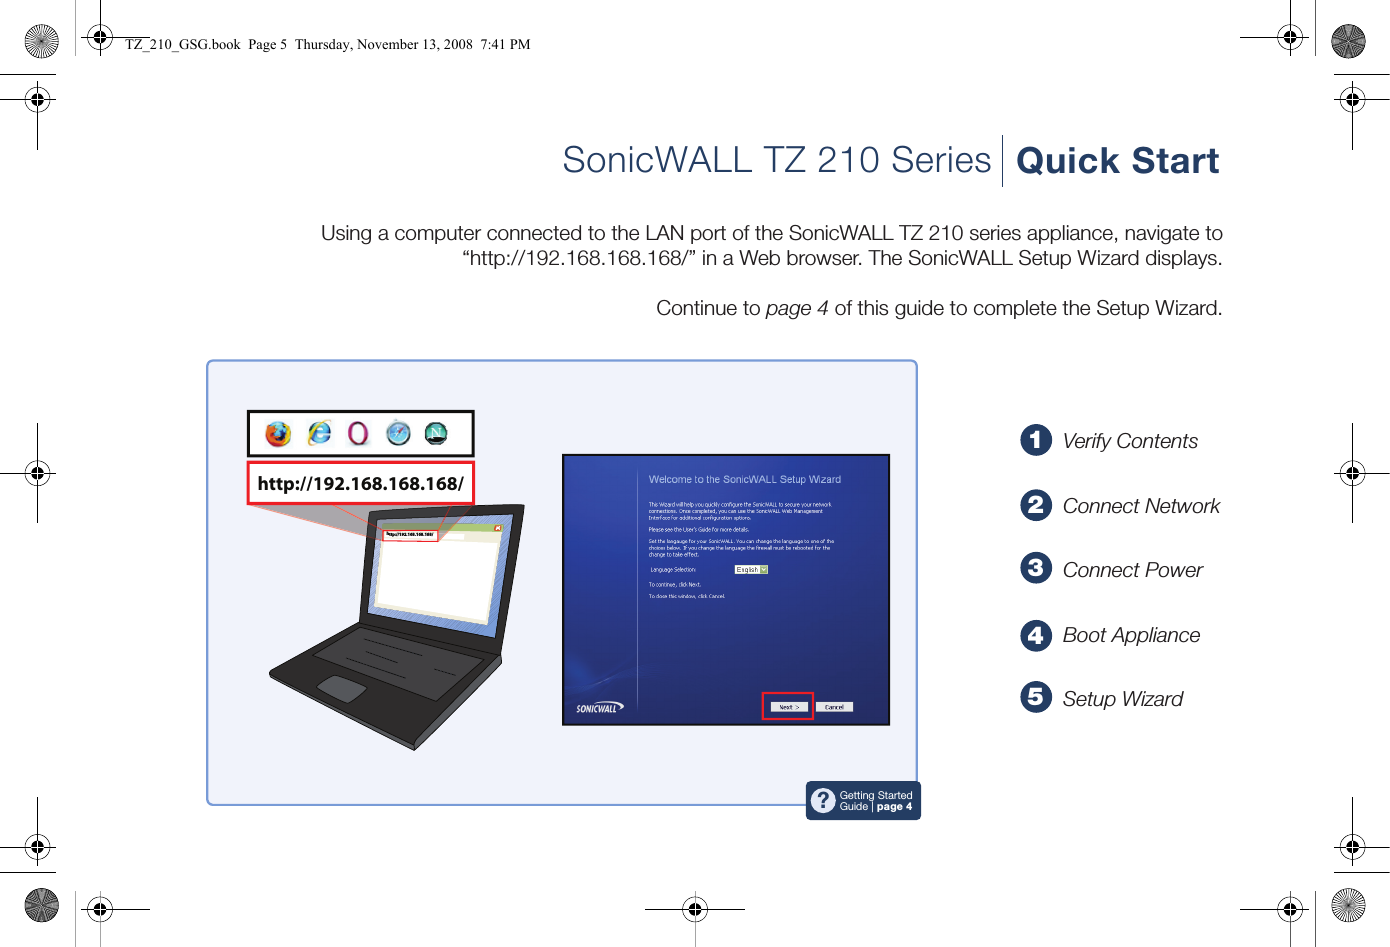 12345SonicWALL TZ 210 Series Quick Starthttp://192.168.168.168/http://192.168.168.168/?Getting StartedGuide | page 4Using a computer connected to the LAN port of the SonicWALL TZ 210 series appliance, navigate to “http://192.168.168.168/” in a Web browser. The SonicWALL Setup Wizard displays.Continue to page 4 of this guide to complete the Setup Wizard.Verify ContentsConnect NetworkConnect PowerBoot ApplianceSetup WizardTZ_210_GSG.book  Page 5  Thursday, November 13, 2008  7:41 PM